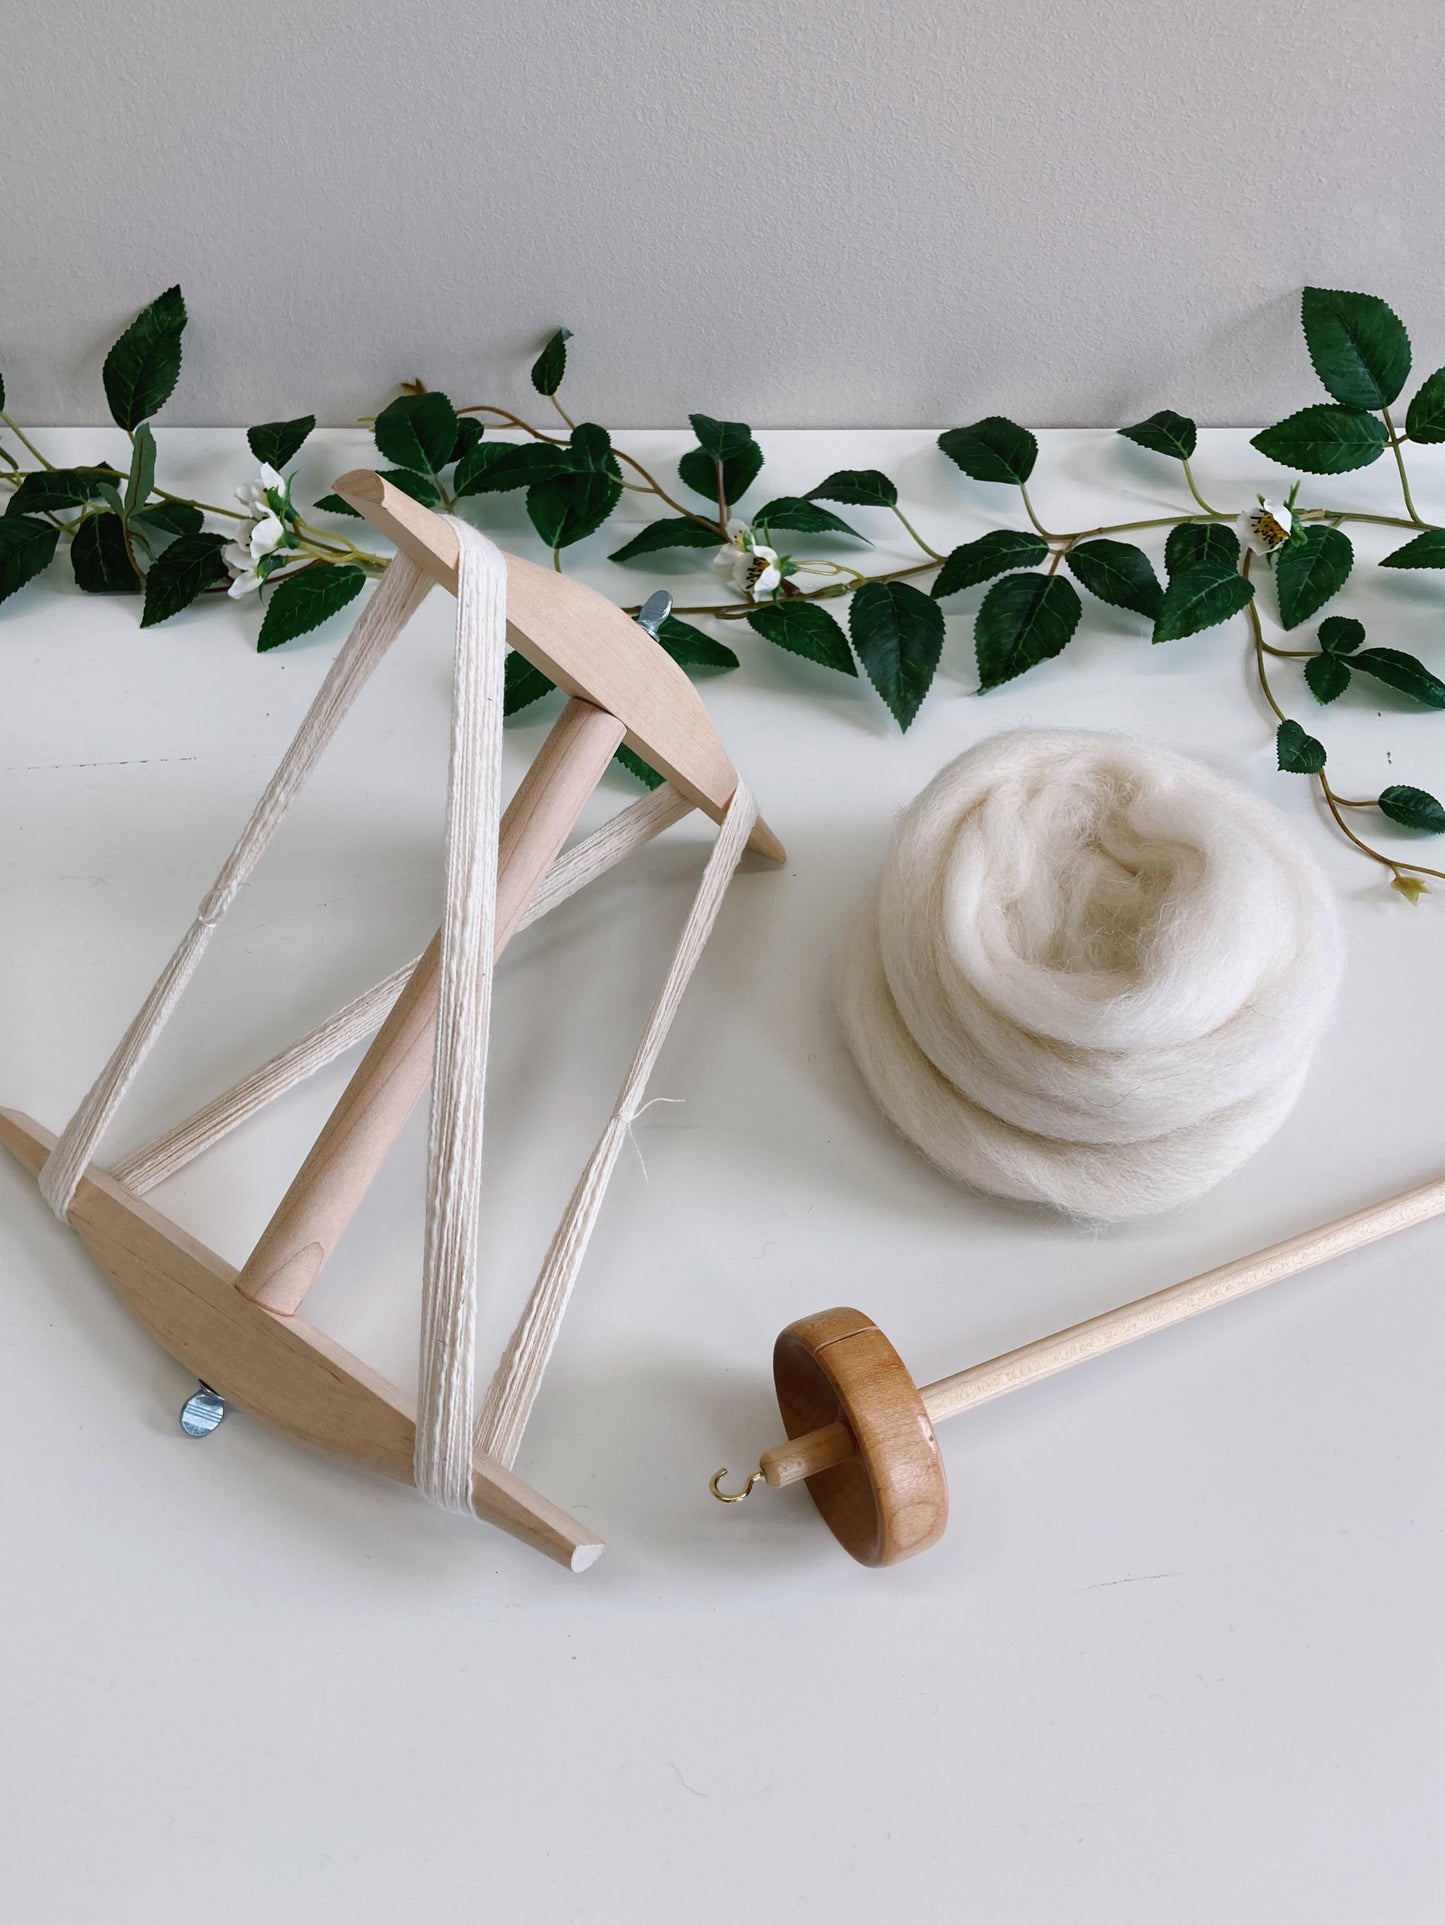 Complete Yarn Spinning Kit - Beginner's Drop Spindle Spinning Kit